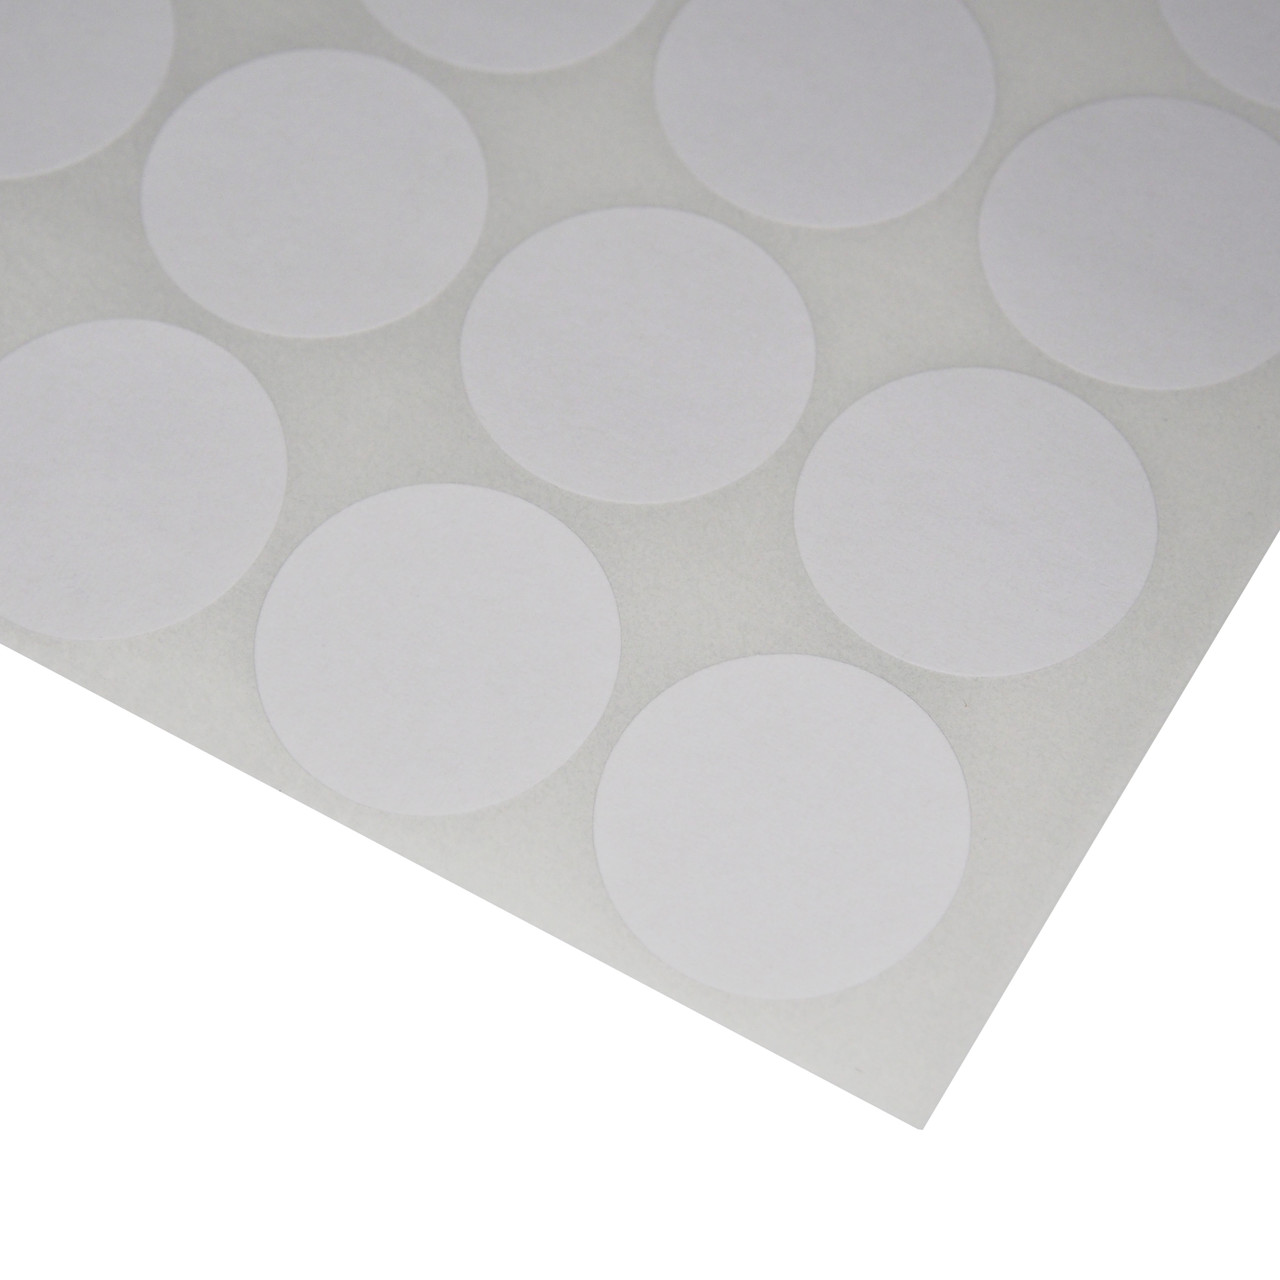 Blank White Price Point Stickers Tags Sticky Labels Rectangles Circles 